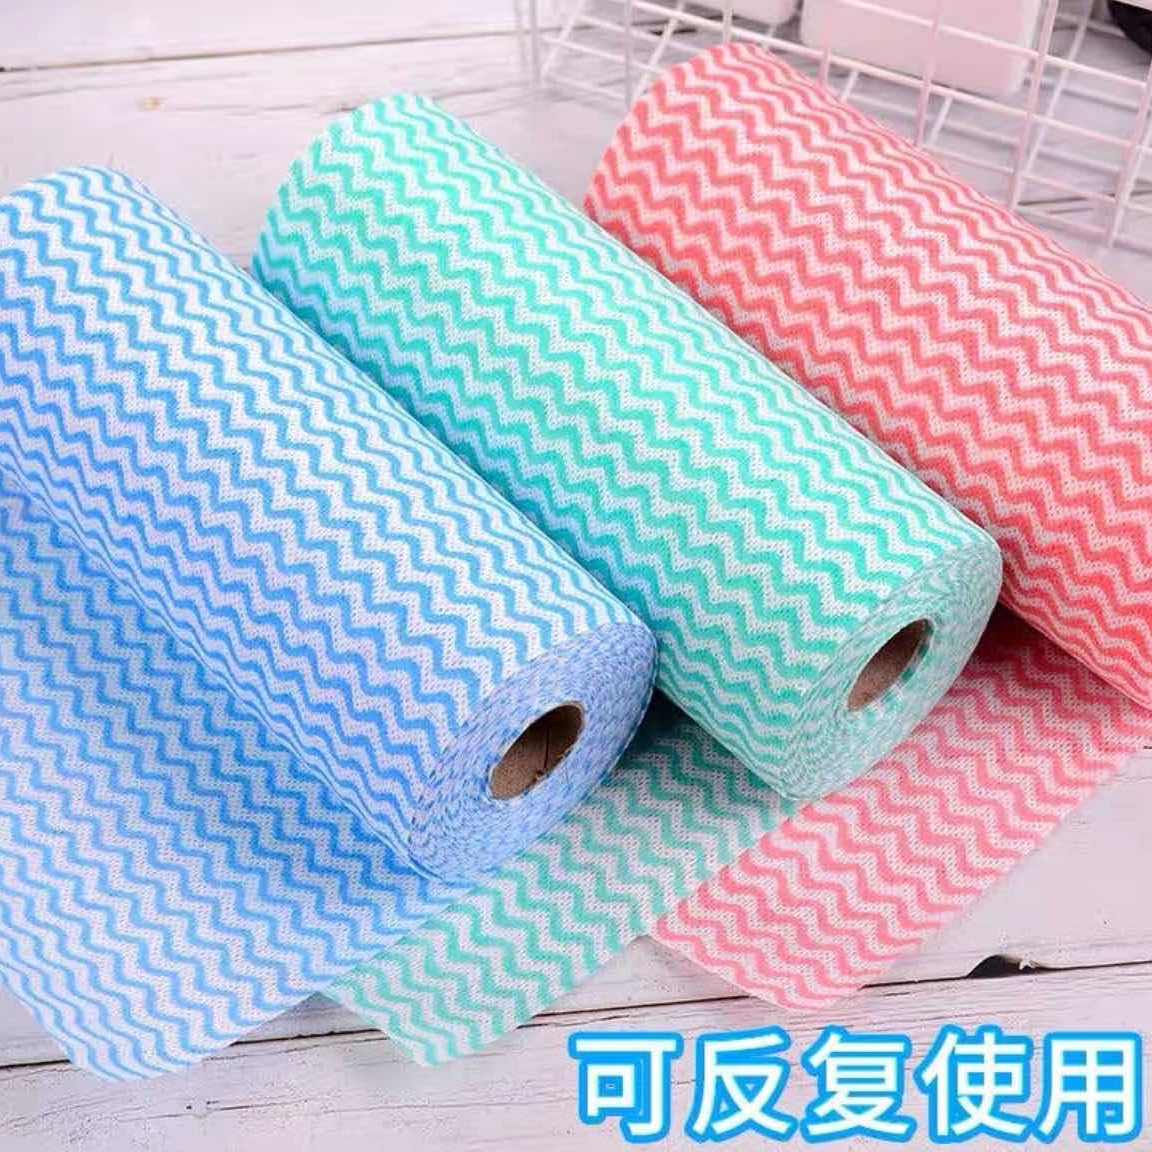 Strictly Selected Point Breaking Wave Roll Disposable Dish Cloth for Lazy People Dish Cloth Kitchen Dry and Wet Dual-Use Oil Paper Household Sheet Pack